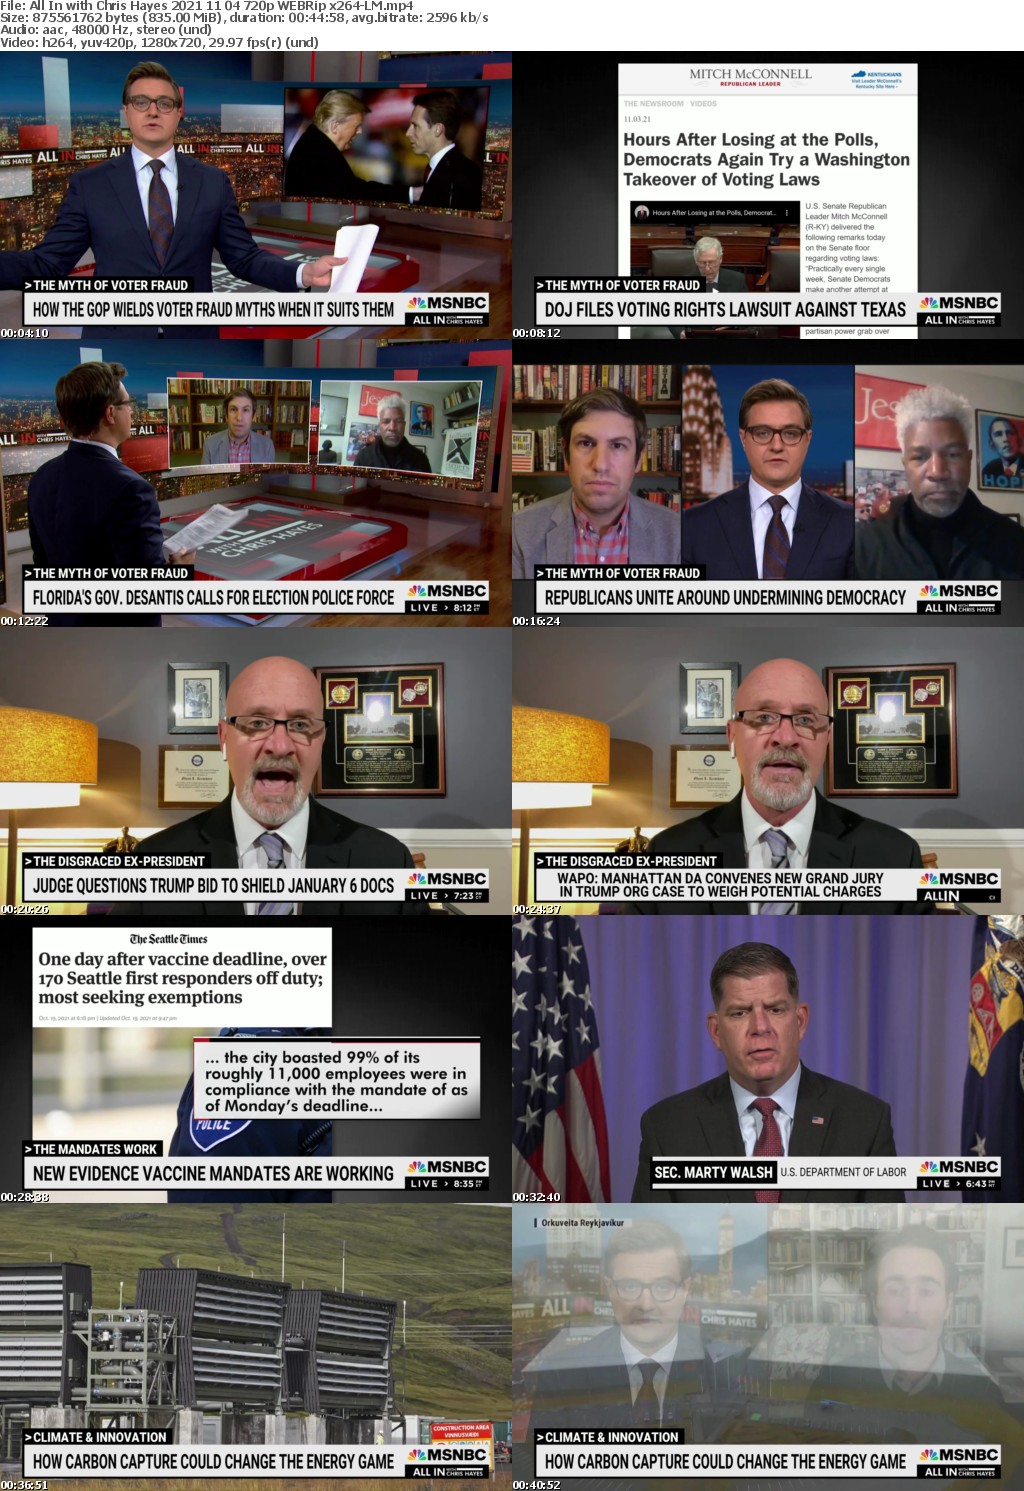 All In with Chris Hayes 2021 11 04 720p WEBRip x264-LM